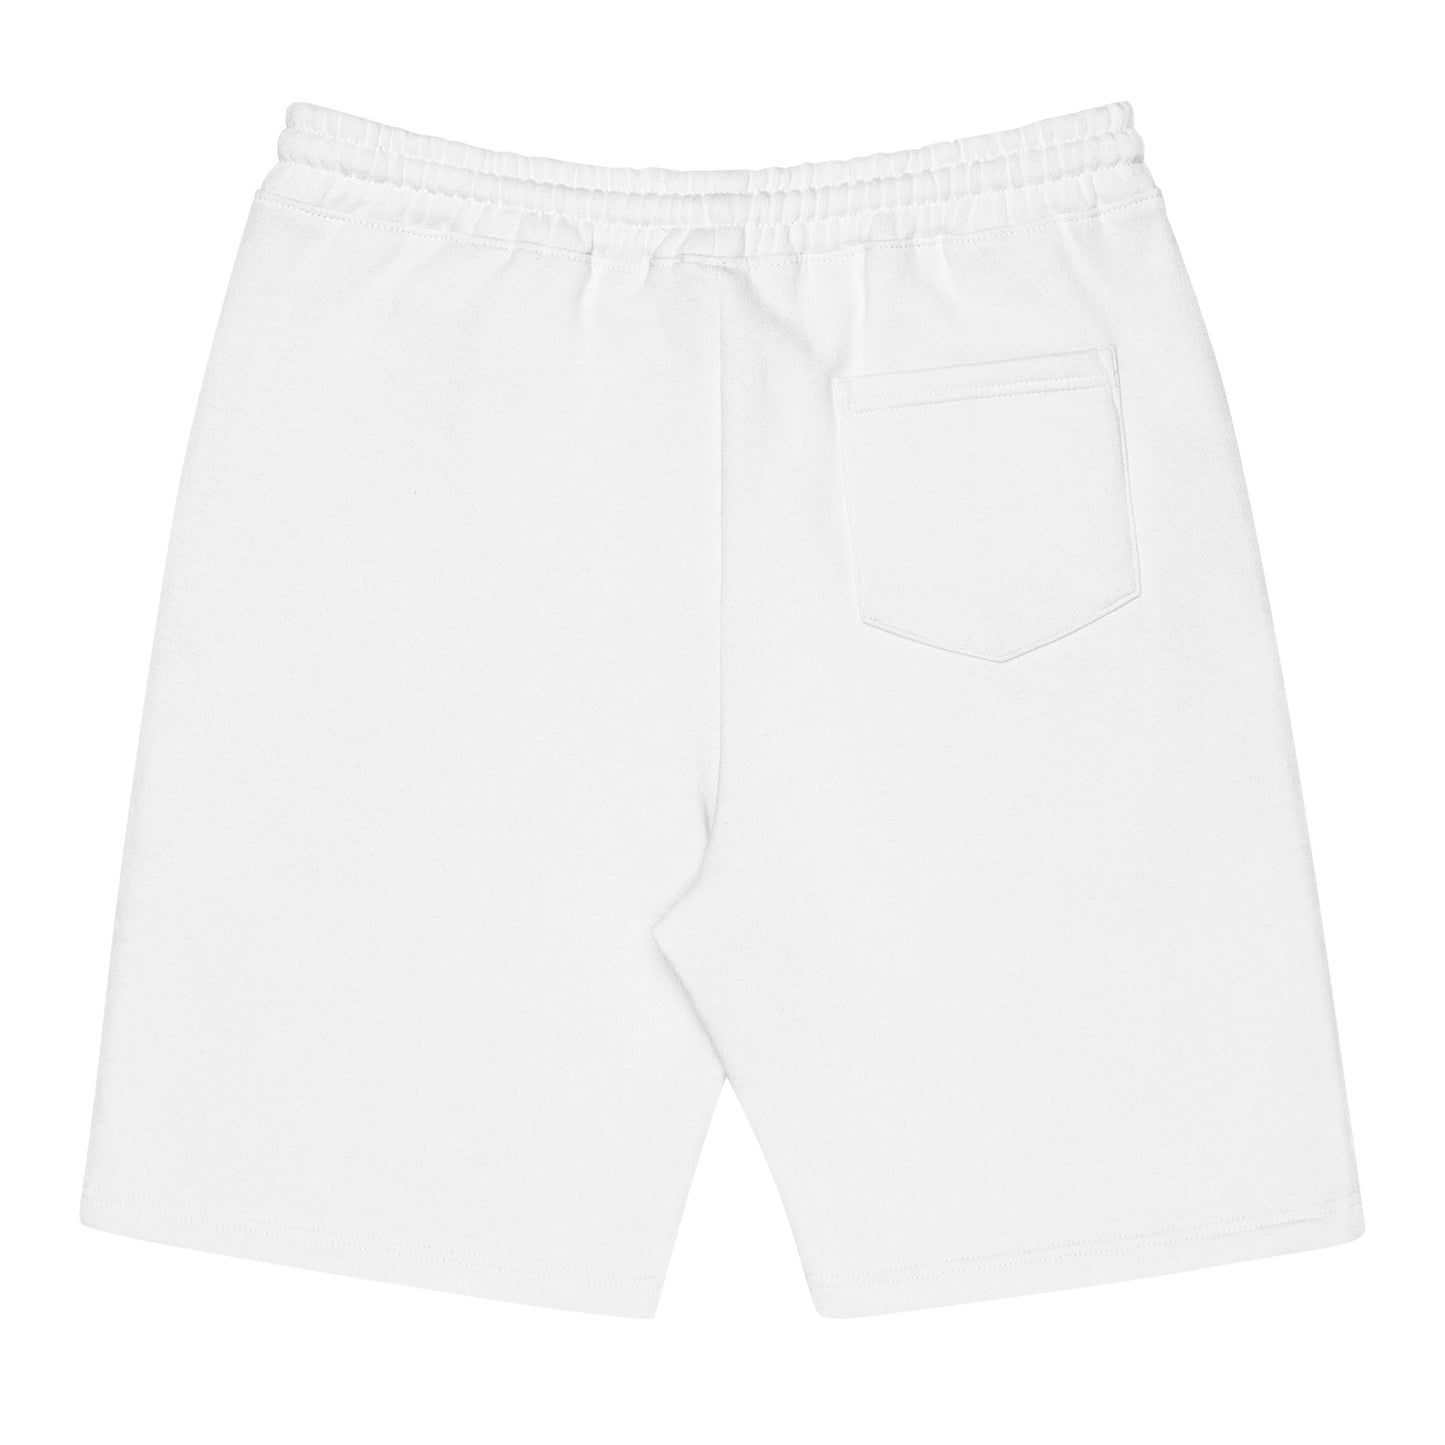 Twin Hammers Men's Embroidered Shorts